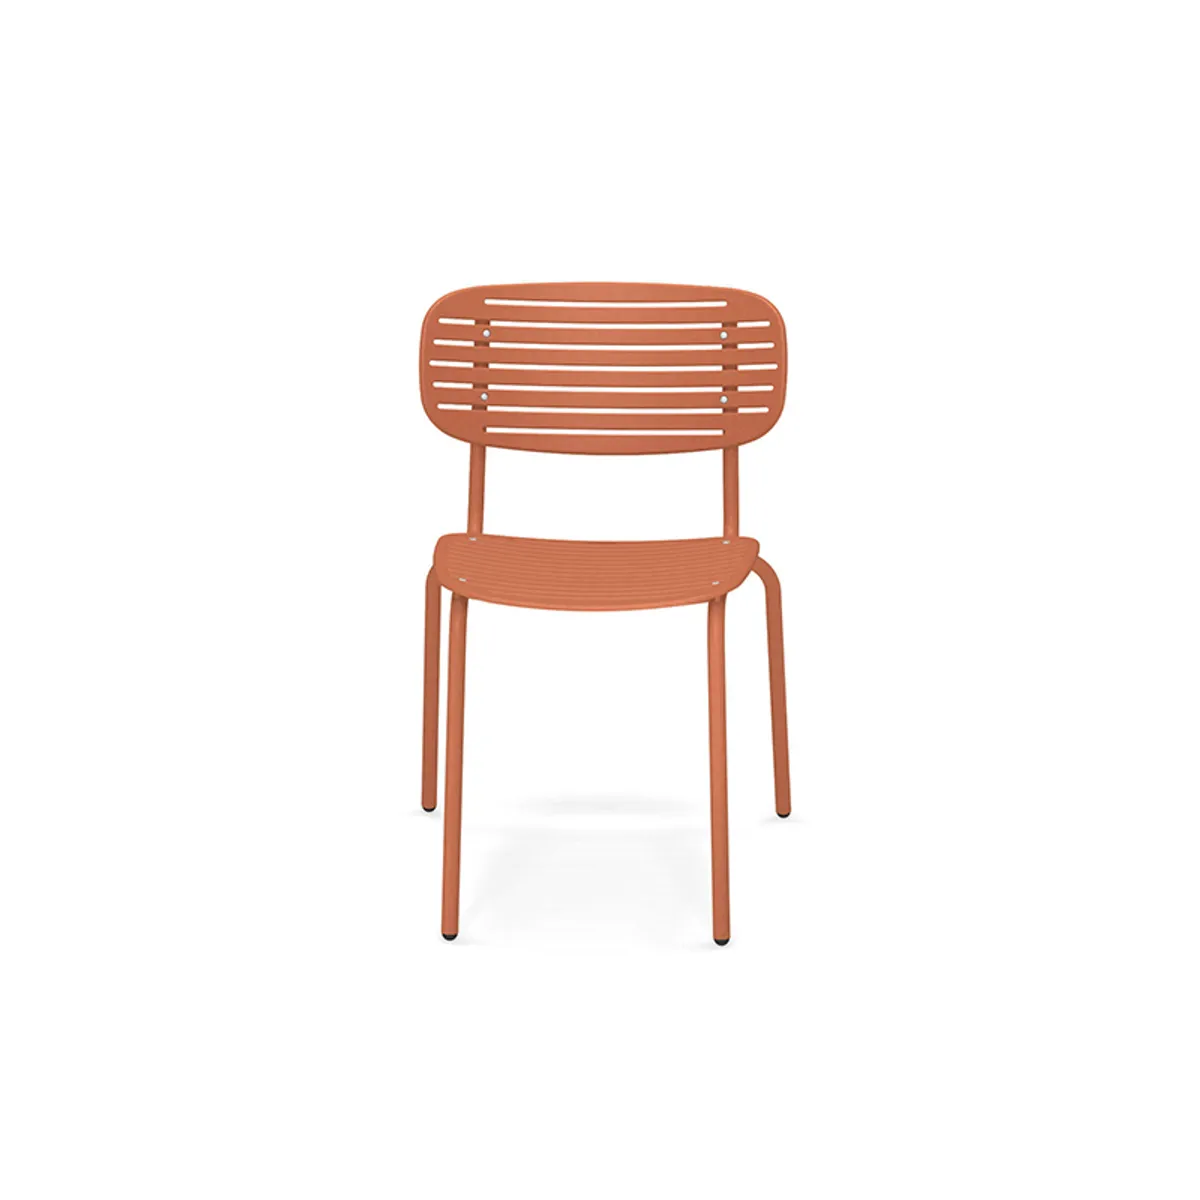 Mom Side Chair In Orange Metal Furniture For Outdoors 031